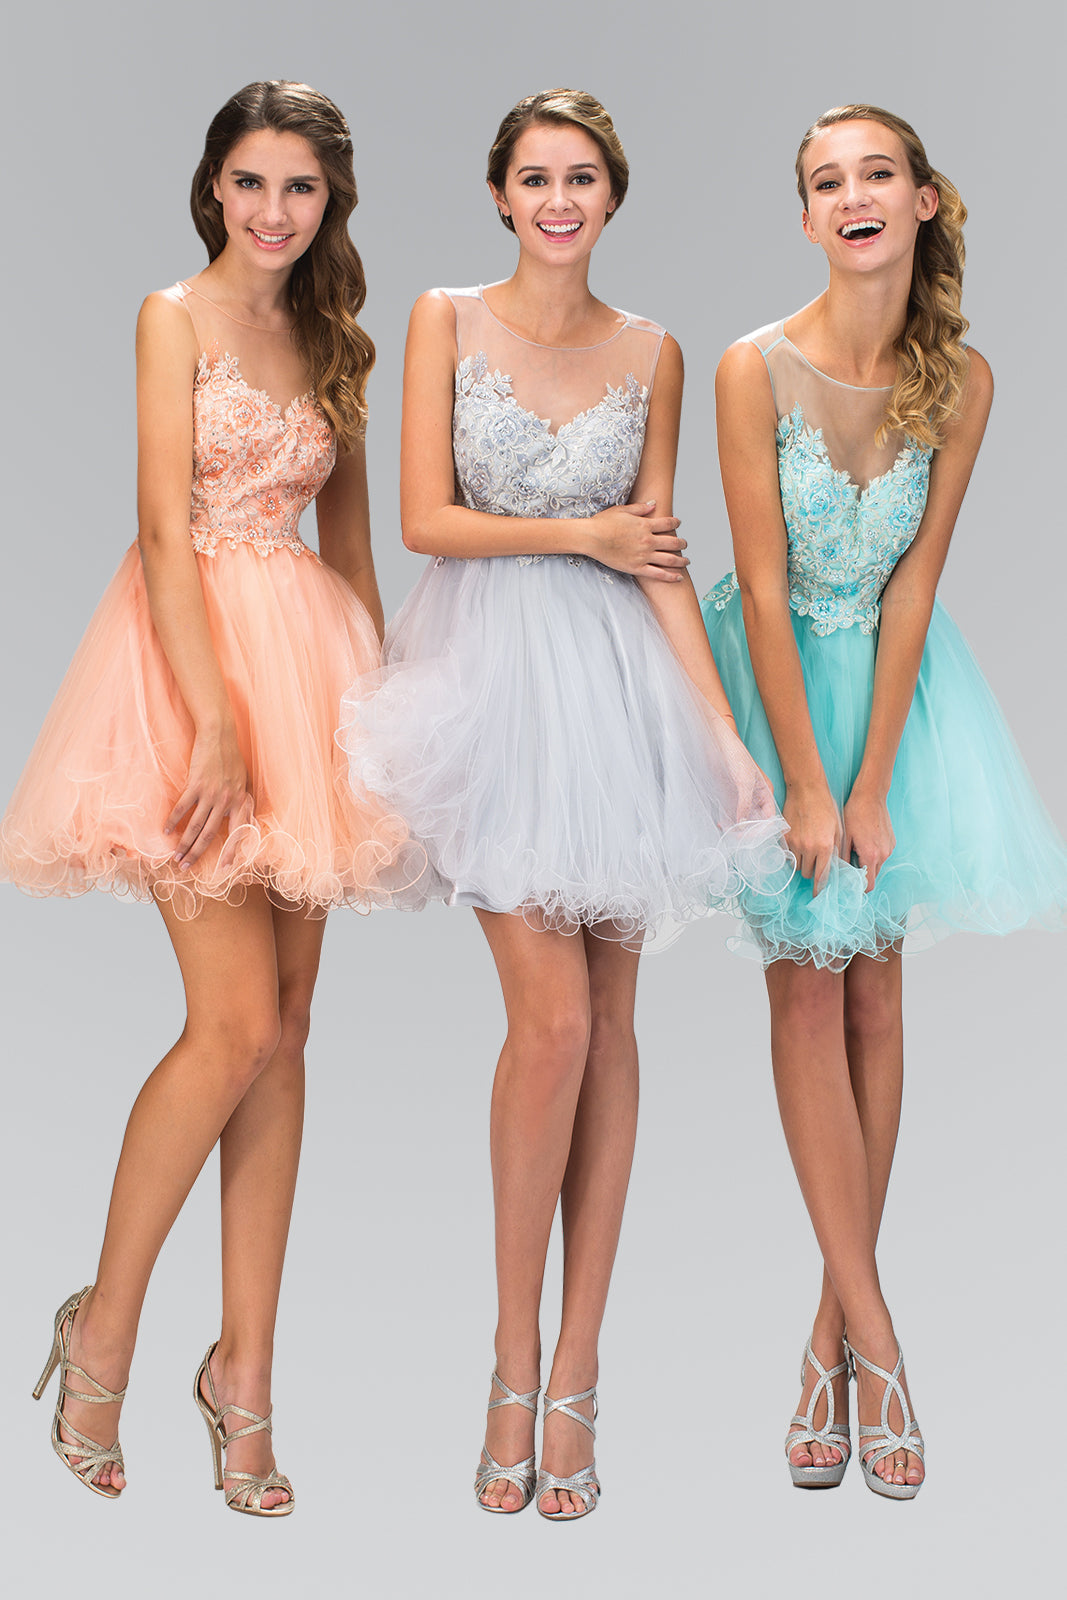 Rolled Hem Tulle Short Dress with Floral Lace Embellished Bodice GLGS2122 Elsy Style HOMECOMING